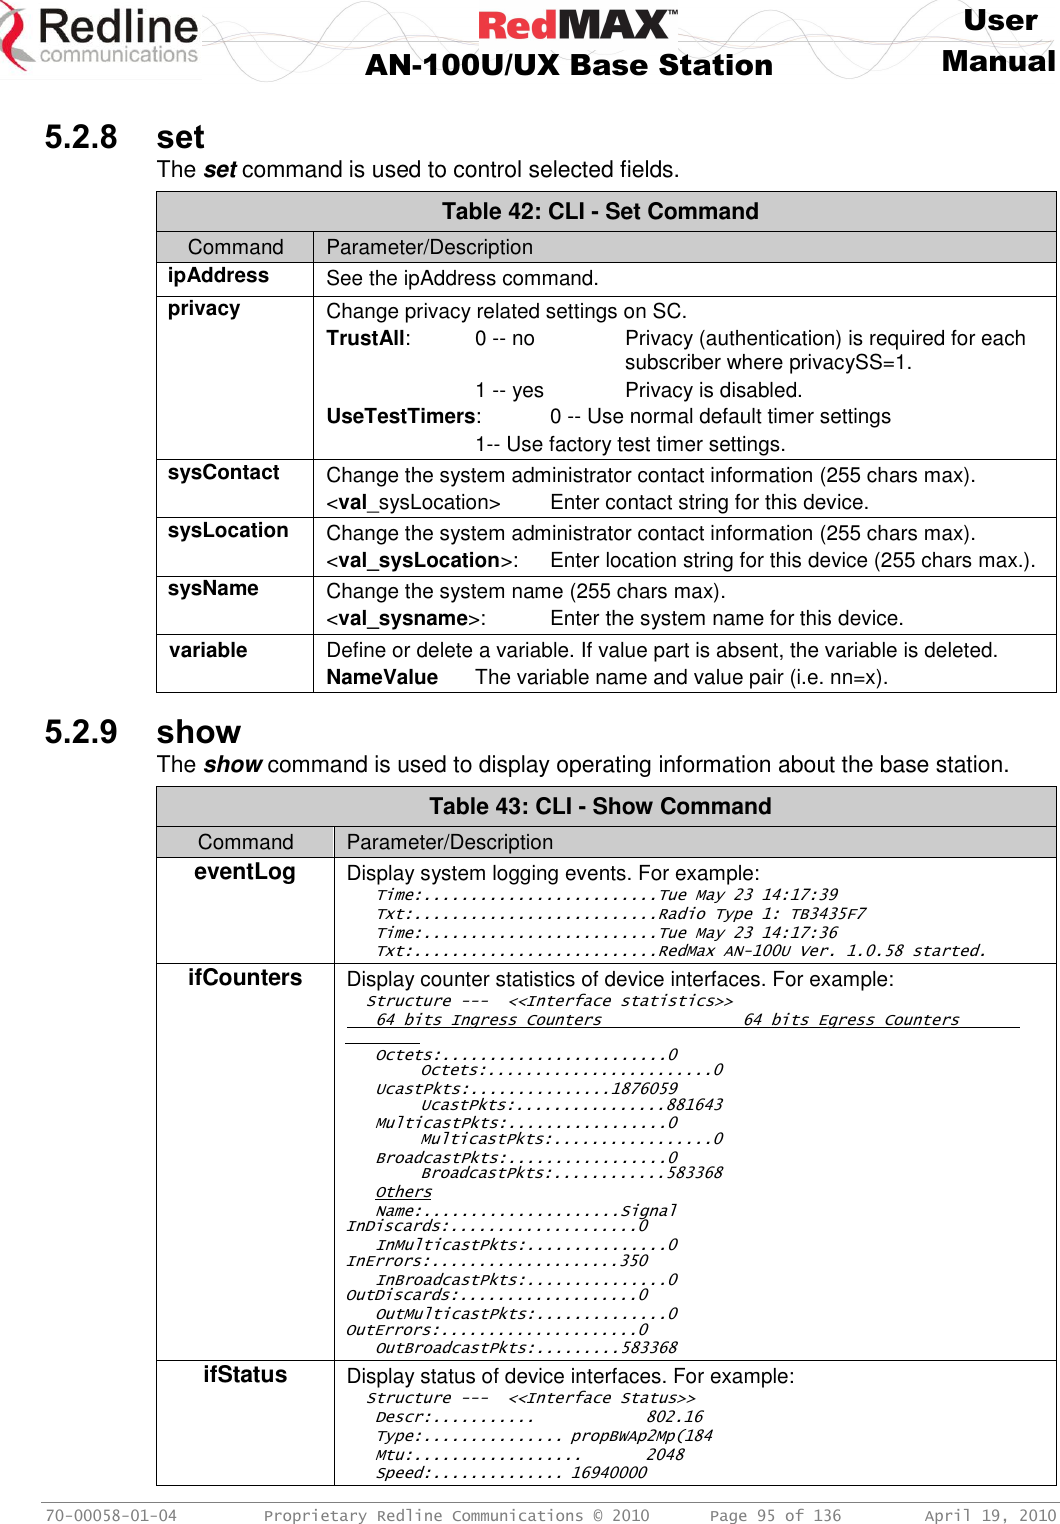     User  AN-100U/UX Base Station Manual   70-00058-01-04  Proprietary Redline Communications © 2010   Page 95 of 136  April 19, 2010  5.2.8 set The set command is used to control selected fields. Table 42: CLI - Set Command Command Parameter/Description ipAddress See the ipAddress command. privacy Change privacy related settings on SC. TrustAll:  0 -- no    Privacy (authentication) is required for each         subscriber where privacySS=1.     1 -- yes   Privacy is disabled. UseTestTimers:  0 -- Use normal default timer settings     1-- Use factory test timer settings. sysContact Change the system administrator contact information (255 chars max). &lt;val_sysLocation&gt;  Enter contact string for this device. sysLocation Change the system administrator contact information (255 chars max). &lt;val_sysLocation&gt;:  Enter location string for this device (255 chars max.). sysName Change the system name (255 chars max). &lt;val_sysname&gt;:  Enter the system name for this device. variable Define or delete a variable. If value part is absent, the variable is deleted.  NameValue  The variable name and value pair (i.e. nn=x).  5.2.9 show The show command is used to display operating information about the base station. Table 43: CLI - Show Command Command Parameter/Description eventLog Display system logging events. For example:    Time:.........................Tue May 23 14:17:39    Txt:..........................Radio Type 1: TB3435F7    Time:.........................Tue May 23 14:17:36    Txt:..........................RedMax AN-100U Ver. 1.0.58 started. ifCounters Display counter statistics of device interfaces. For example:   Structure ---  &lt;&lt;Interface statistics&gt;&gt;    64 bits Ingress Counters               64 bits Egress Counters       Octets:........................0          Octets:........................0    UcastPkts:...............1876059         UcastPkts:................881643    MulticastPkts:.................0         MulticastPkts:.................0    BroadcastPkts:.................0         BroadcastPkts:............583368    Others    Name:.....................Signal       InDiscards:....................0    InMulticastPkts:...............0       InErrors:....................350    InBroadcastPkts:...............0       OutDiscards:...................0    OutMulticastPkts:..............0       OutErrors:.....................0    OutBroadcastPkts:.........583368  ifStatus Display status of device interfaces. For example:   Structure ---  &lt;&lt;Interface Status&gt;&gt;    Descr:...........    802.16    Type:............... propBWAp2Mp(184    Mtu:..................  2048    Speed:.............. 16940000 